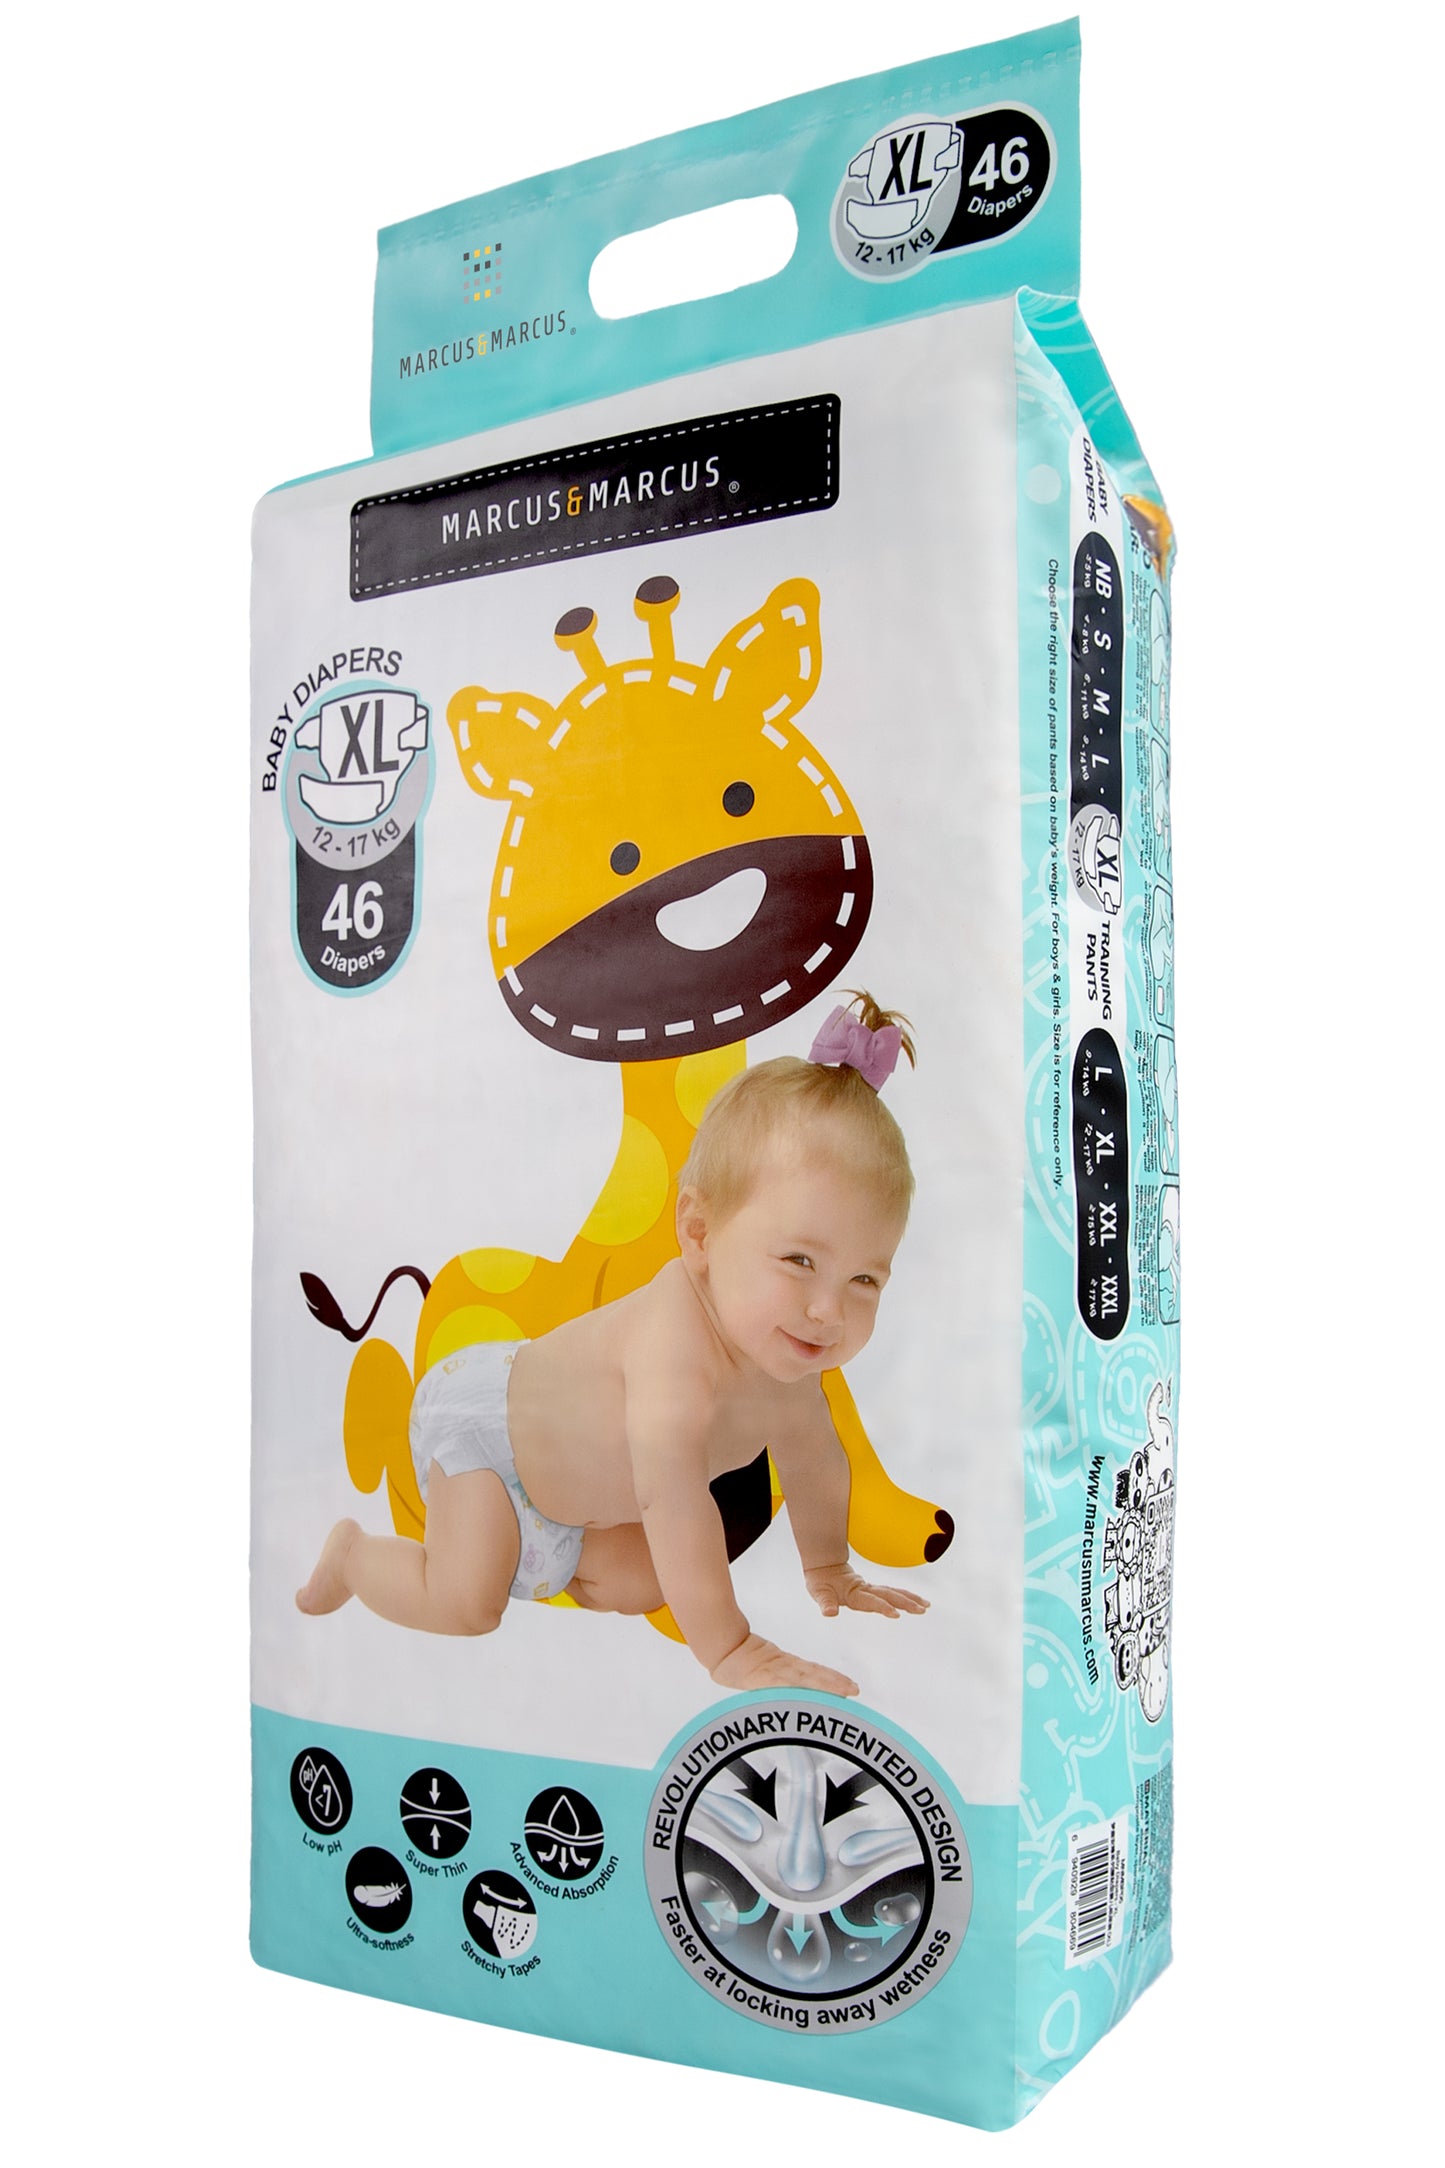 Marcus & Marcus diaper, XL size, super absorbency